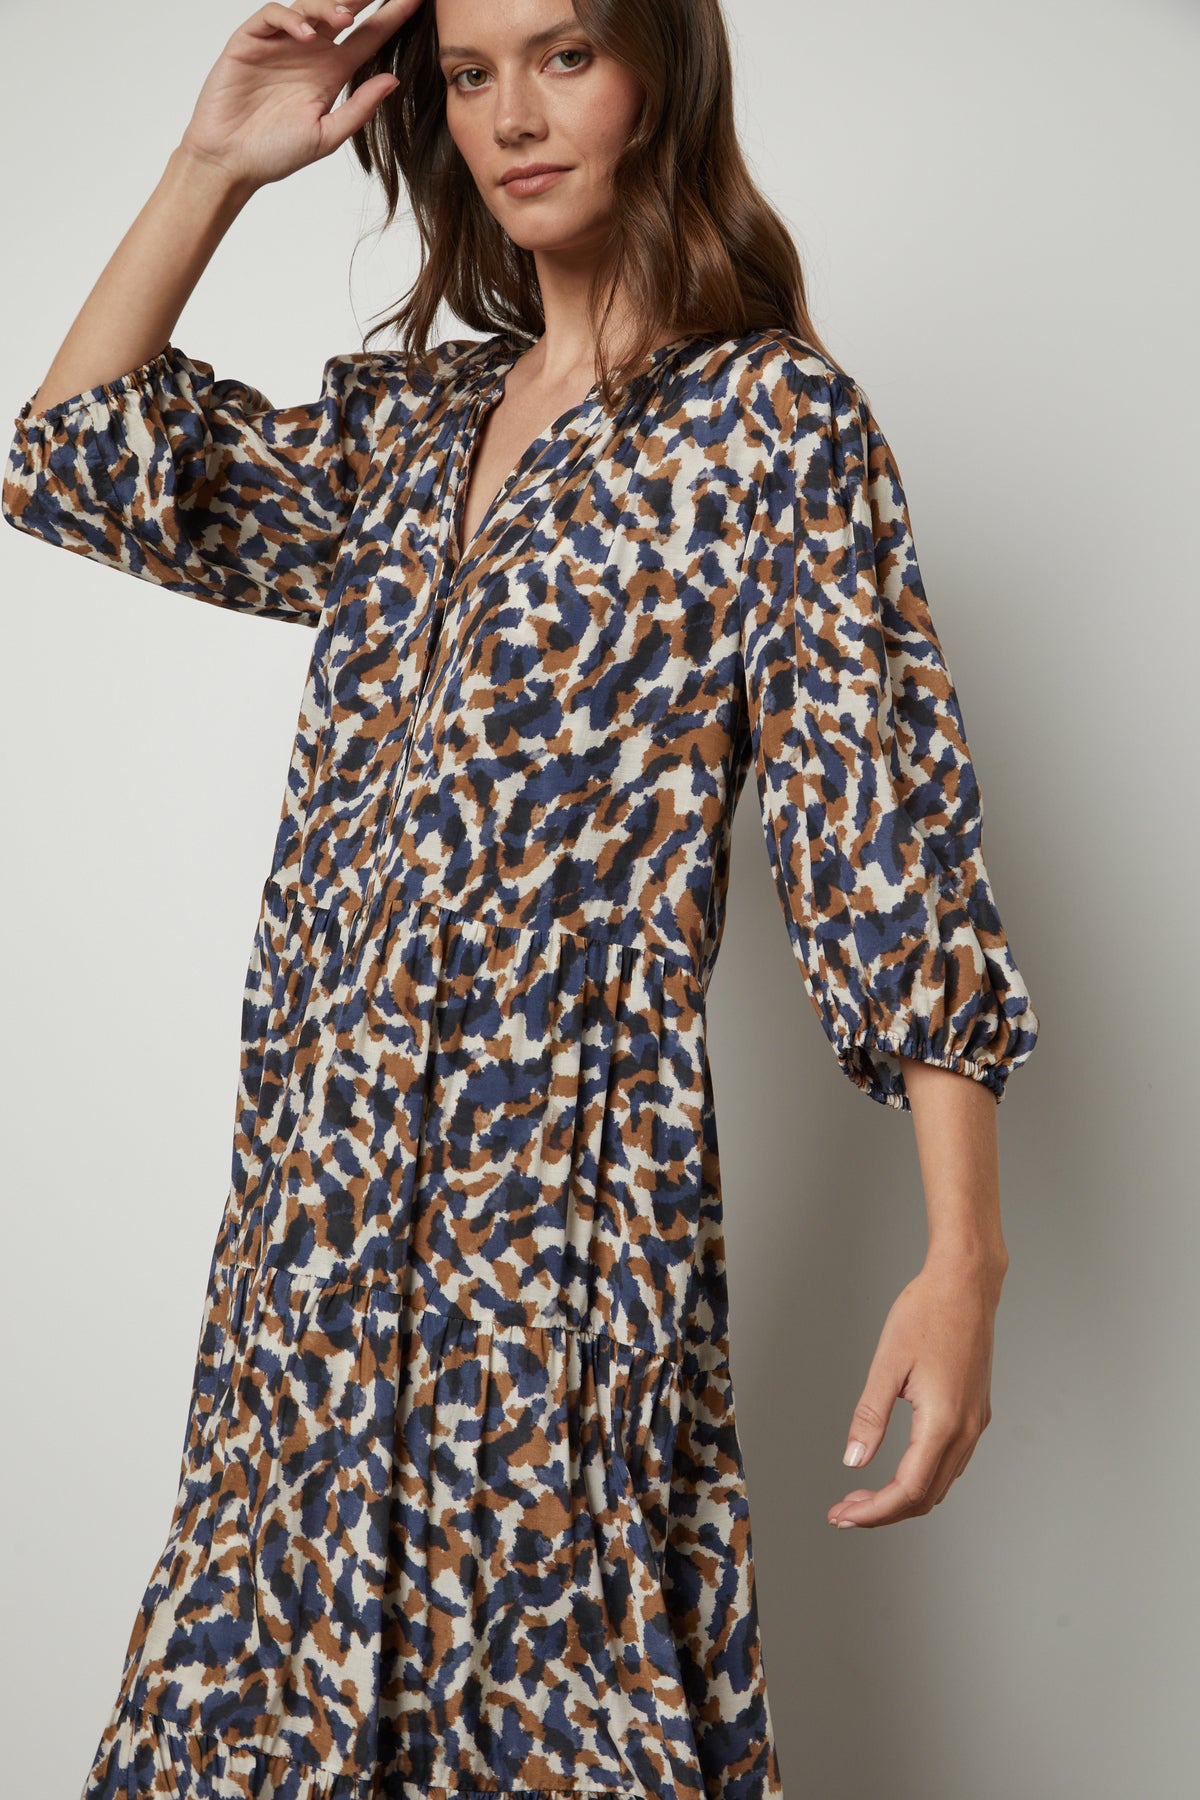 The model is wearing a blue and brown button front Velvet by Graham & Spencer OTTILIE PRINTED BOHO DRESS.-26914793783489